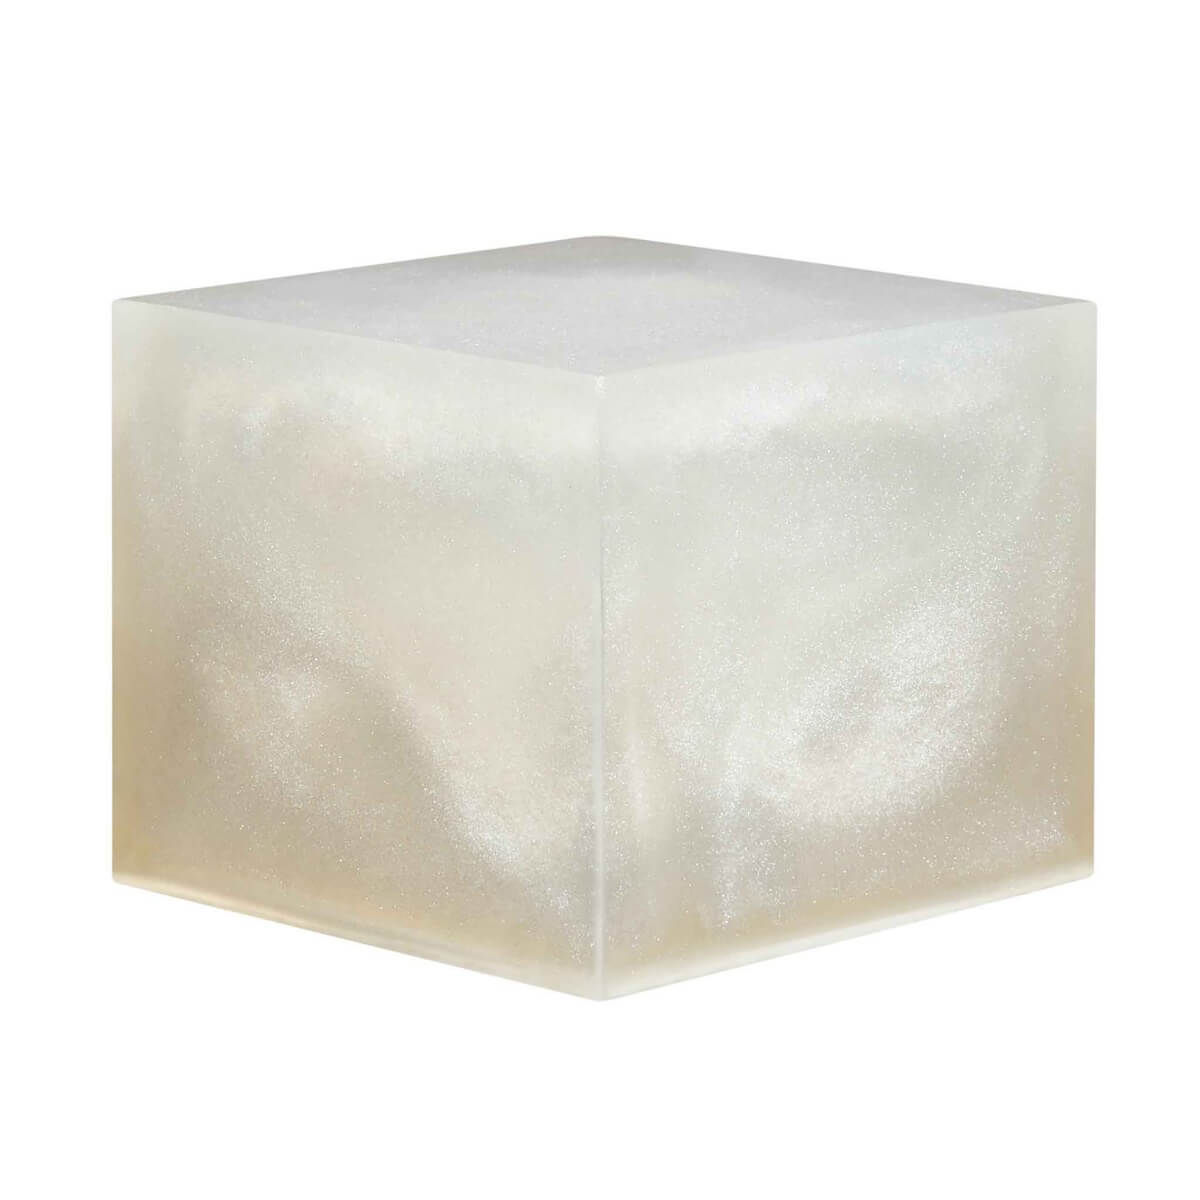 A resin cube made with the Comet Tail Dust Mica Powder Pigment by Pigmently.